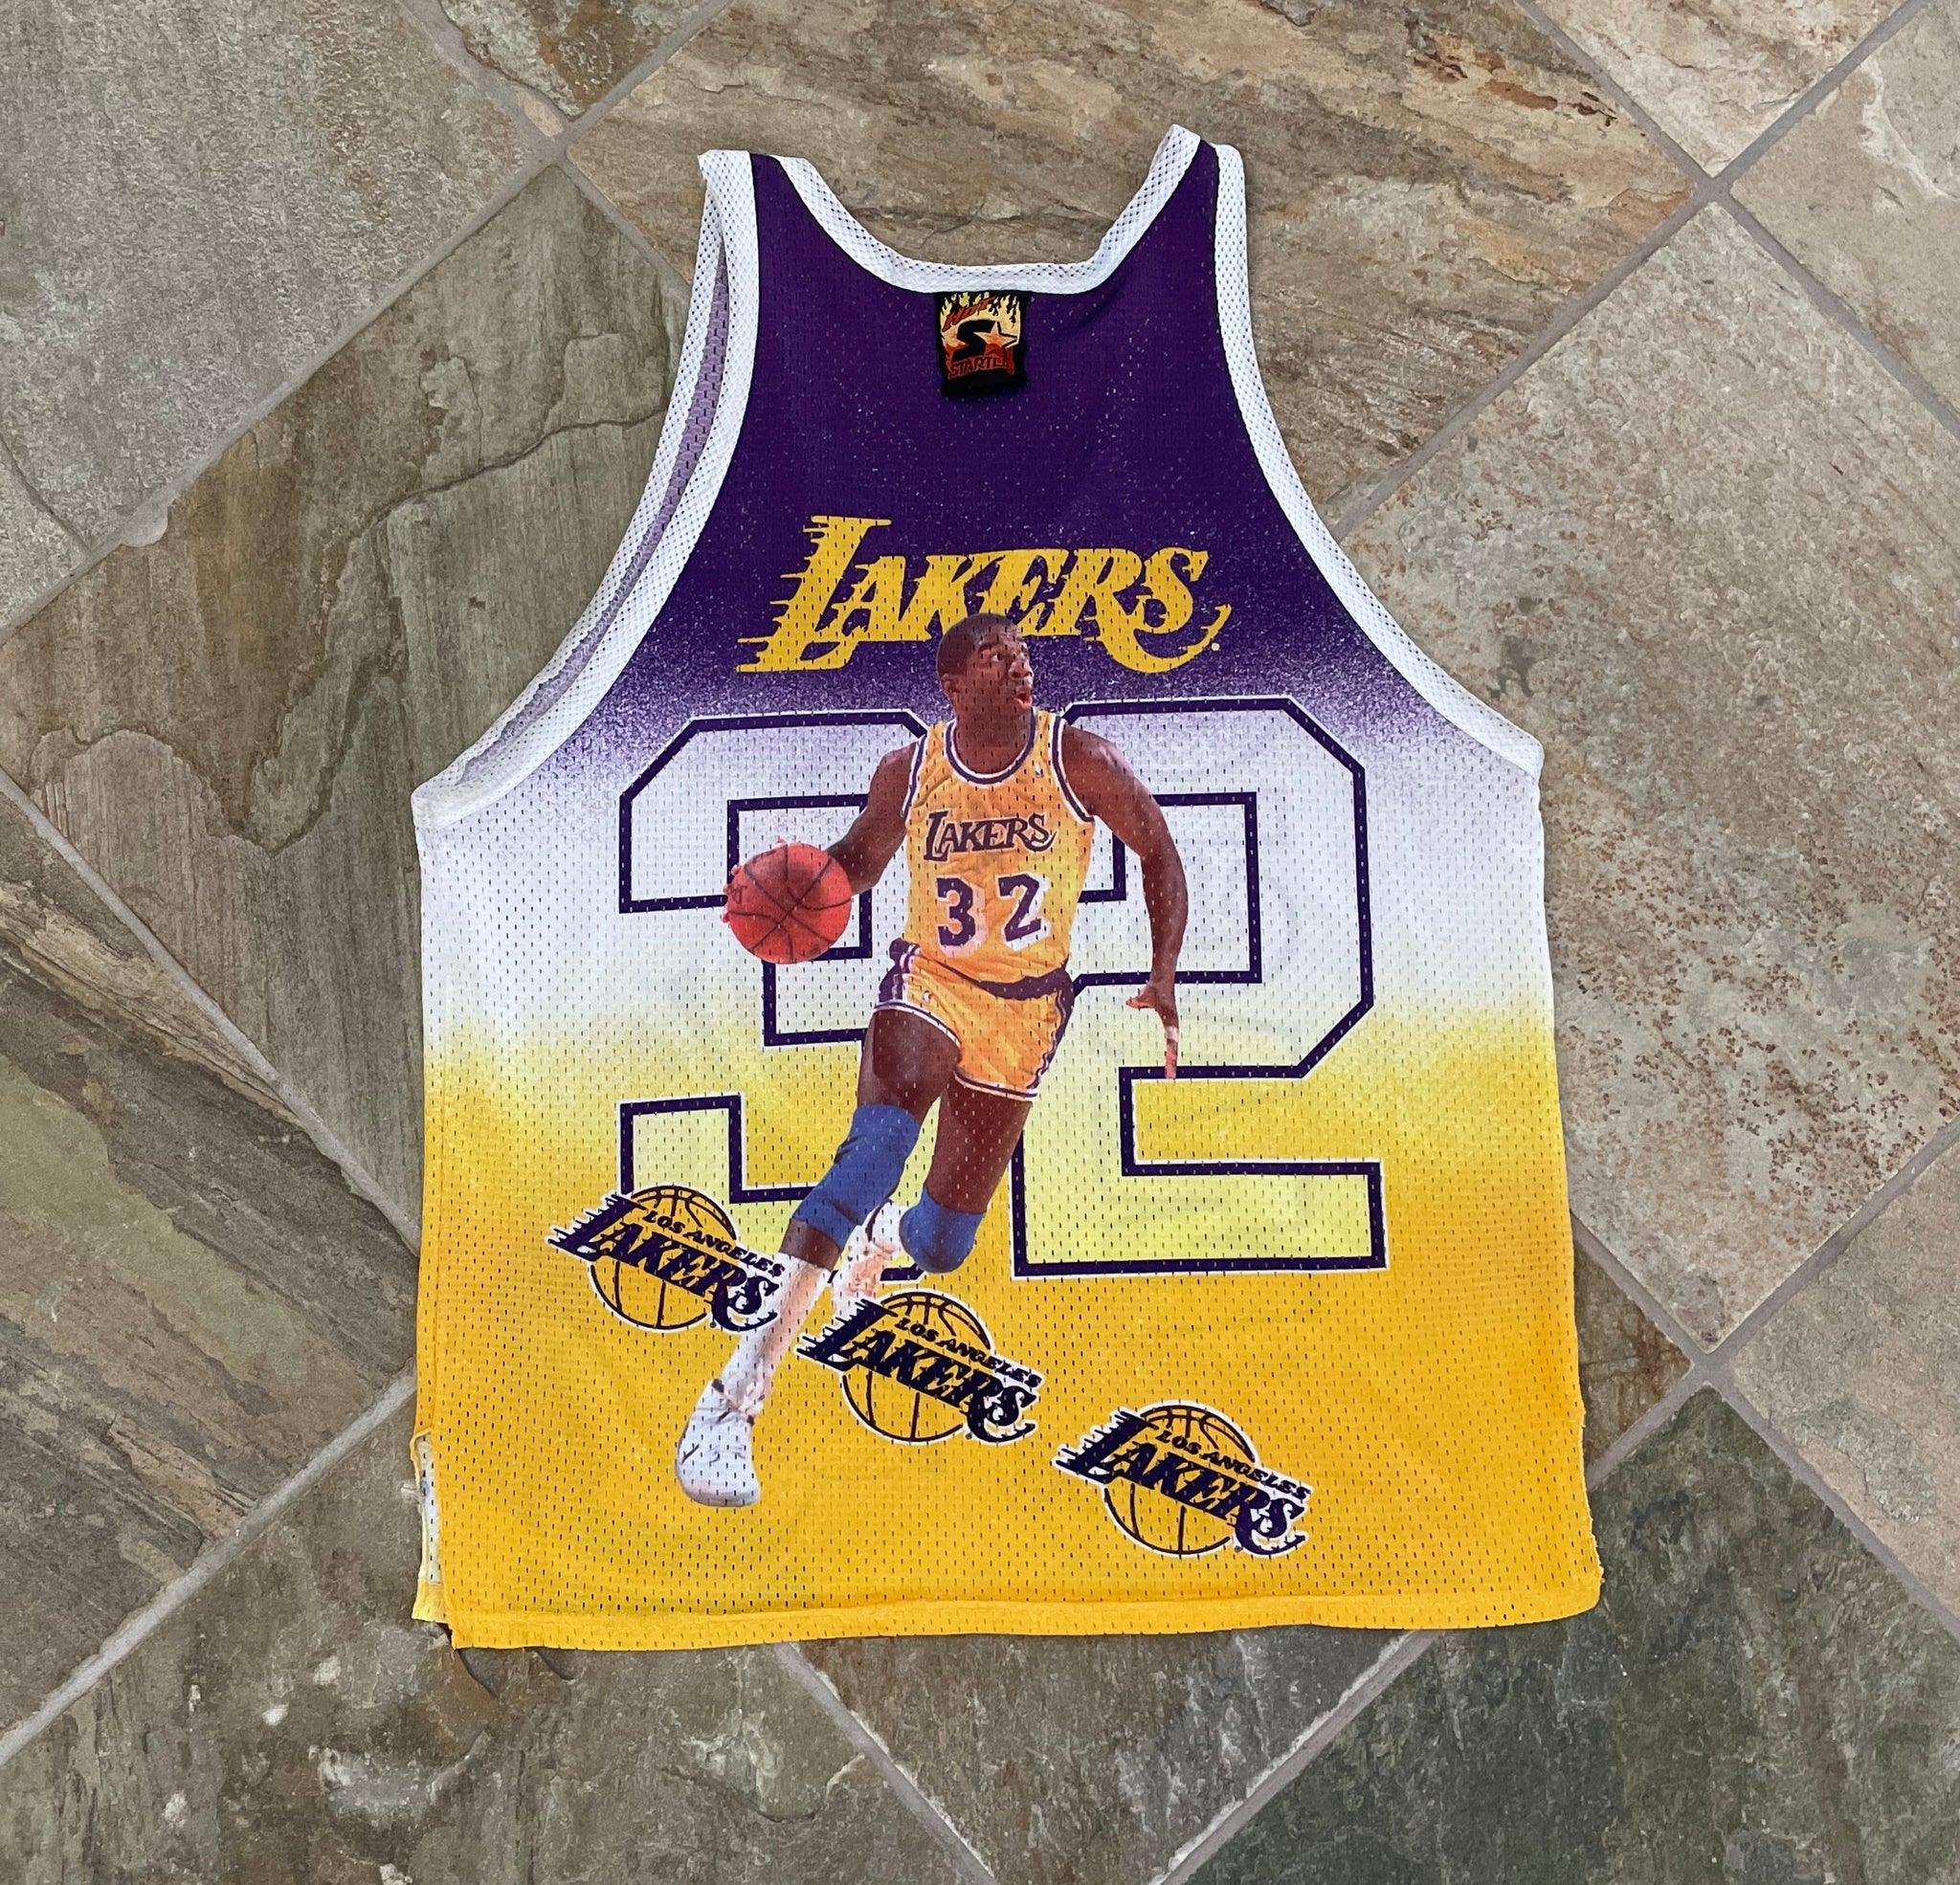 STARTER, Other, Los Angeles Lakers Hockey Jersey By Starter Nba